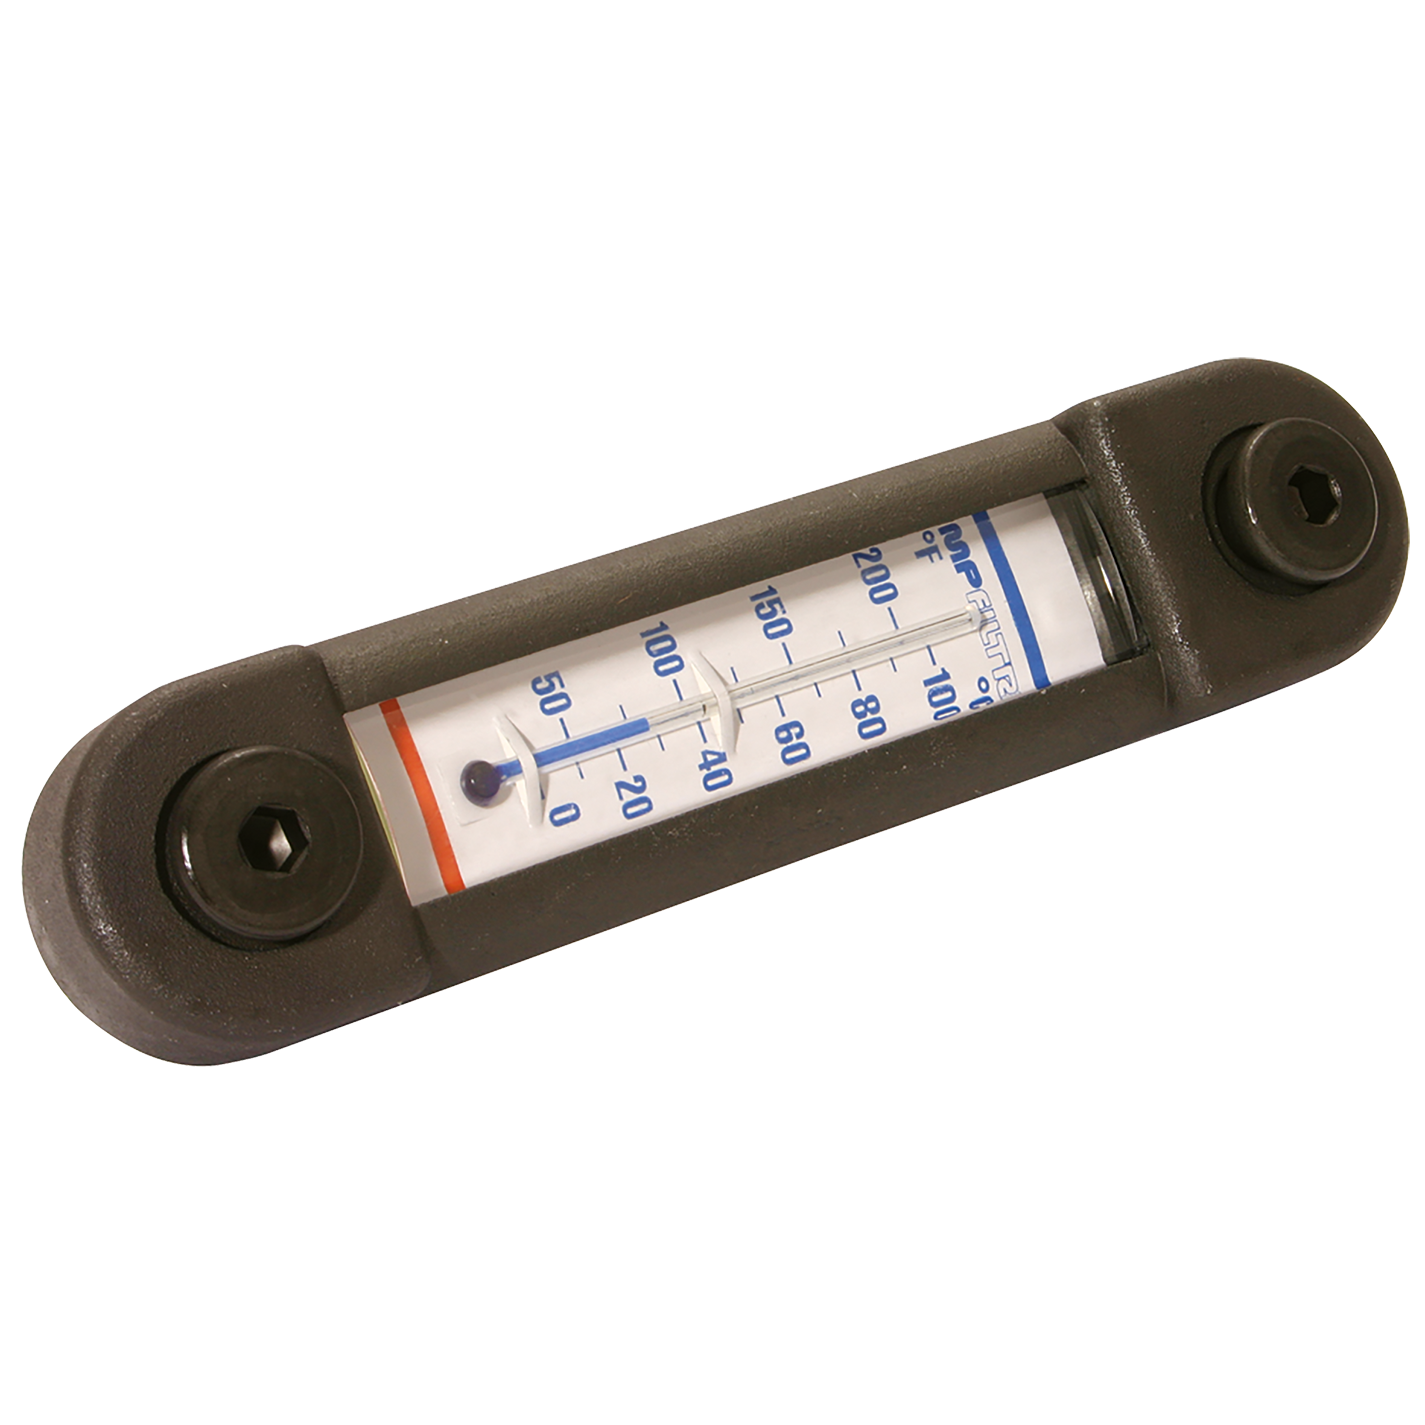 127mm Level Gauge With Thermometer M10 Bolt Thread